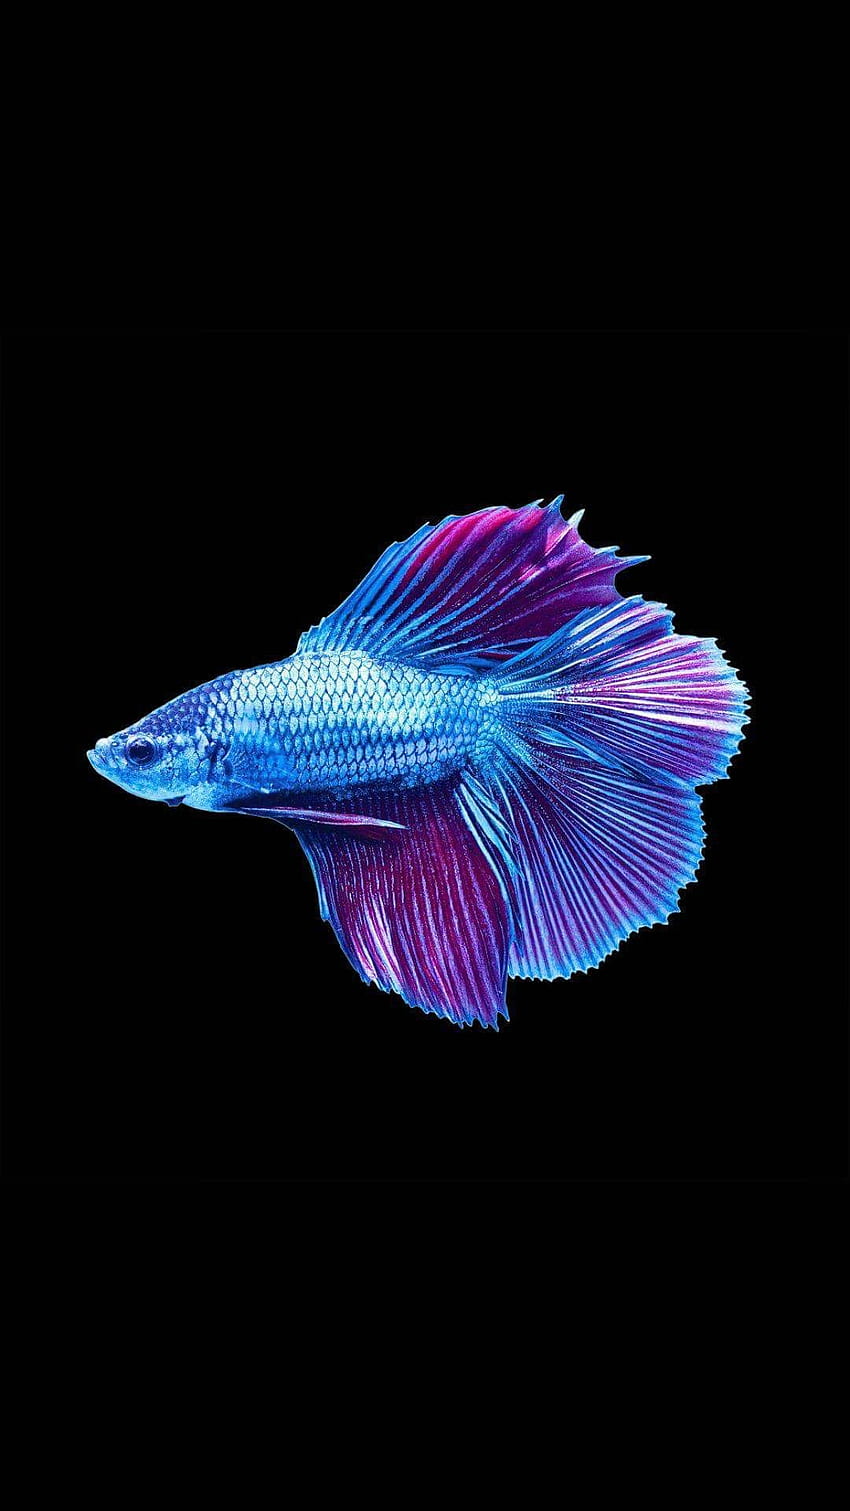 Cool Fish Wallpapers HD Free download  PixelsTalkNet  Cool fish Fish  wallpaper Animal wallpaper